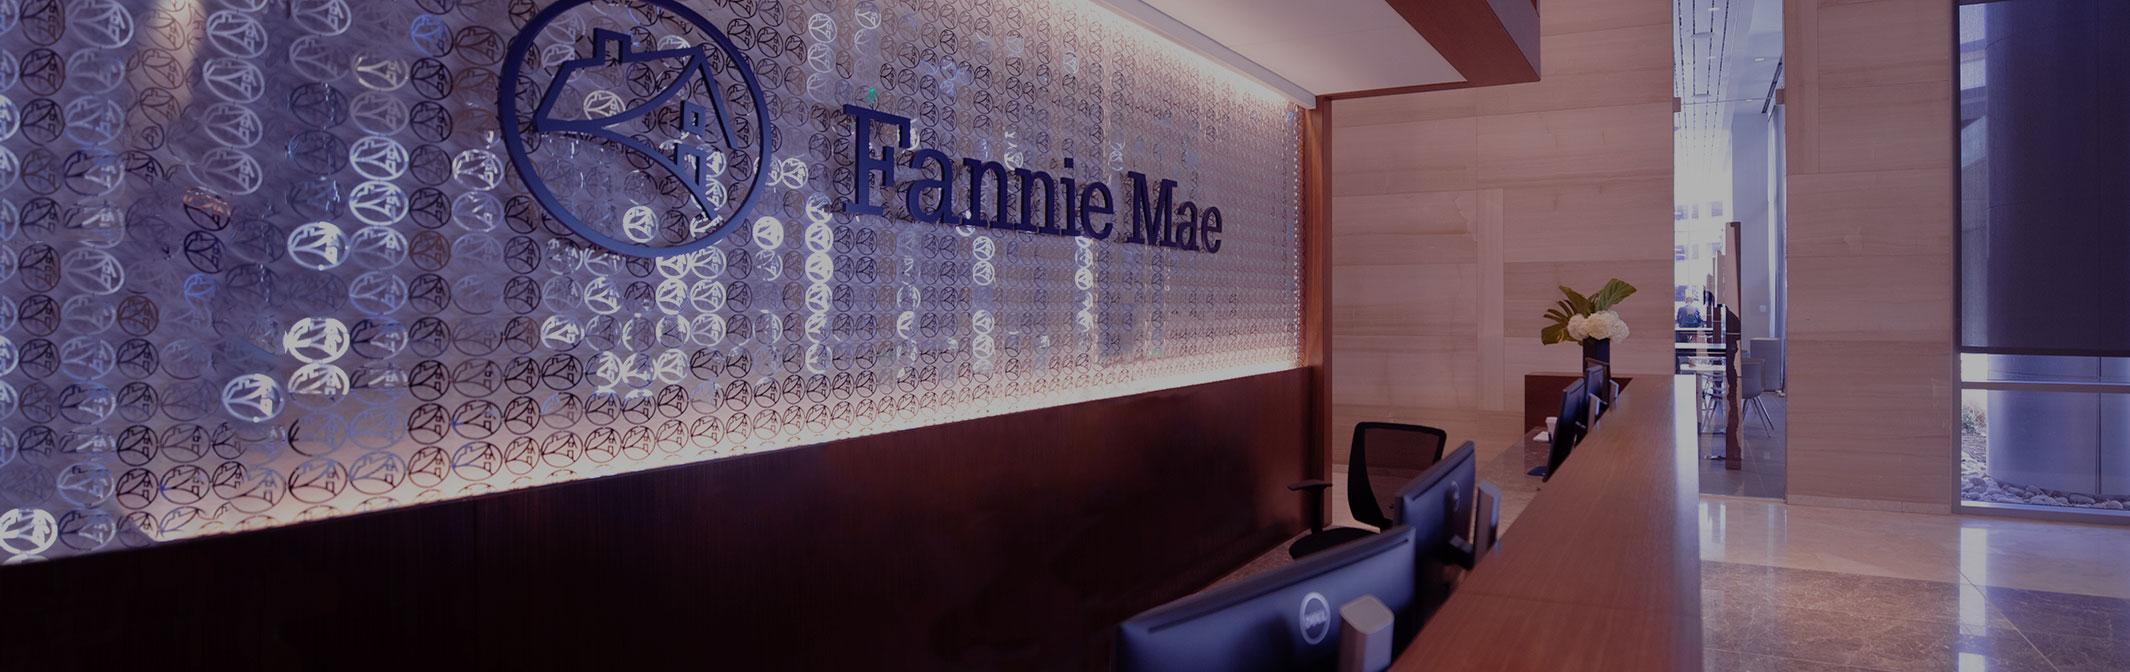 Lobby area from the Fannie Mae offices